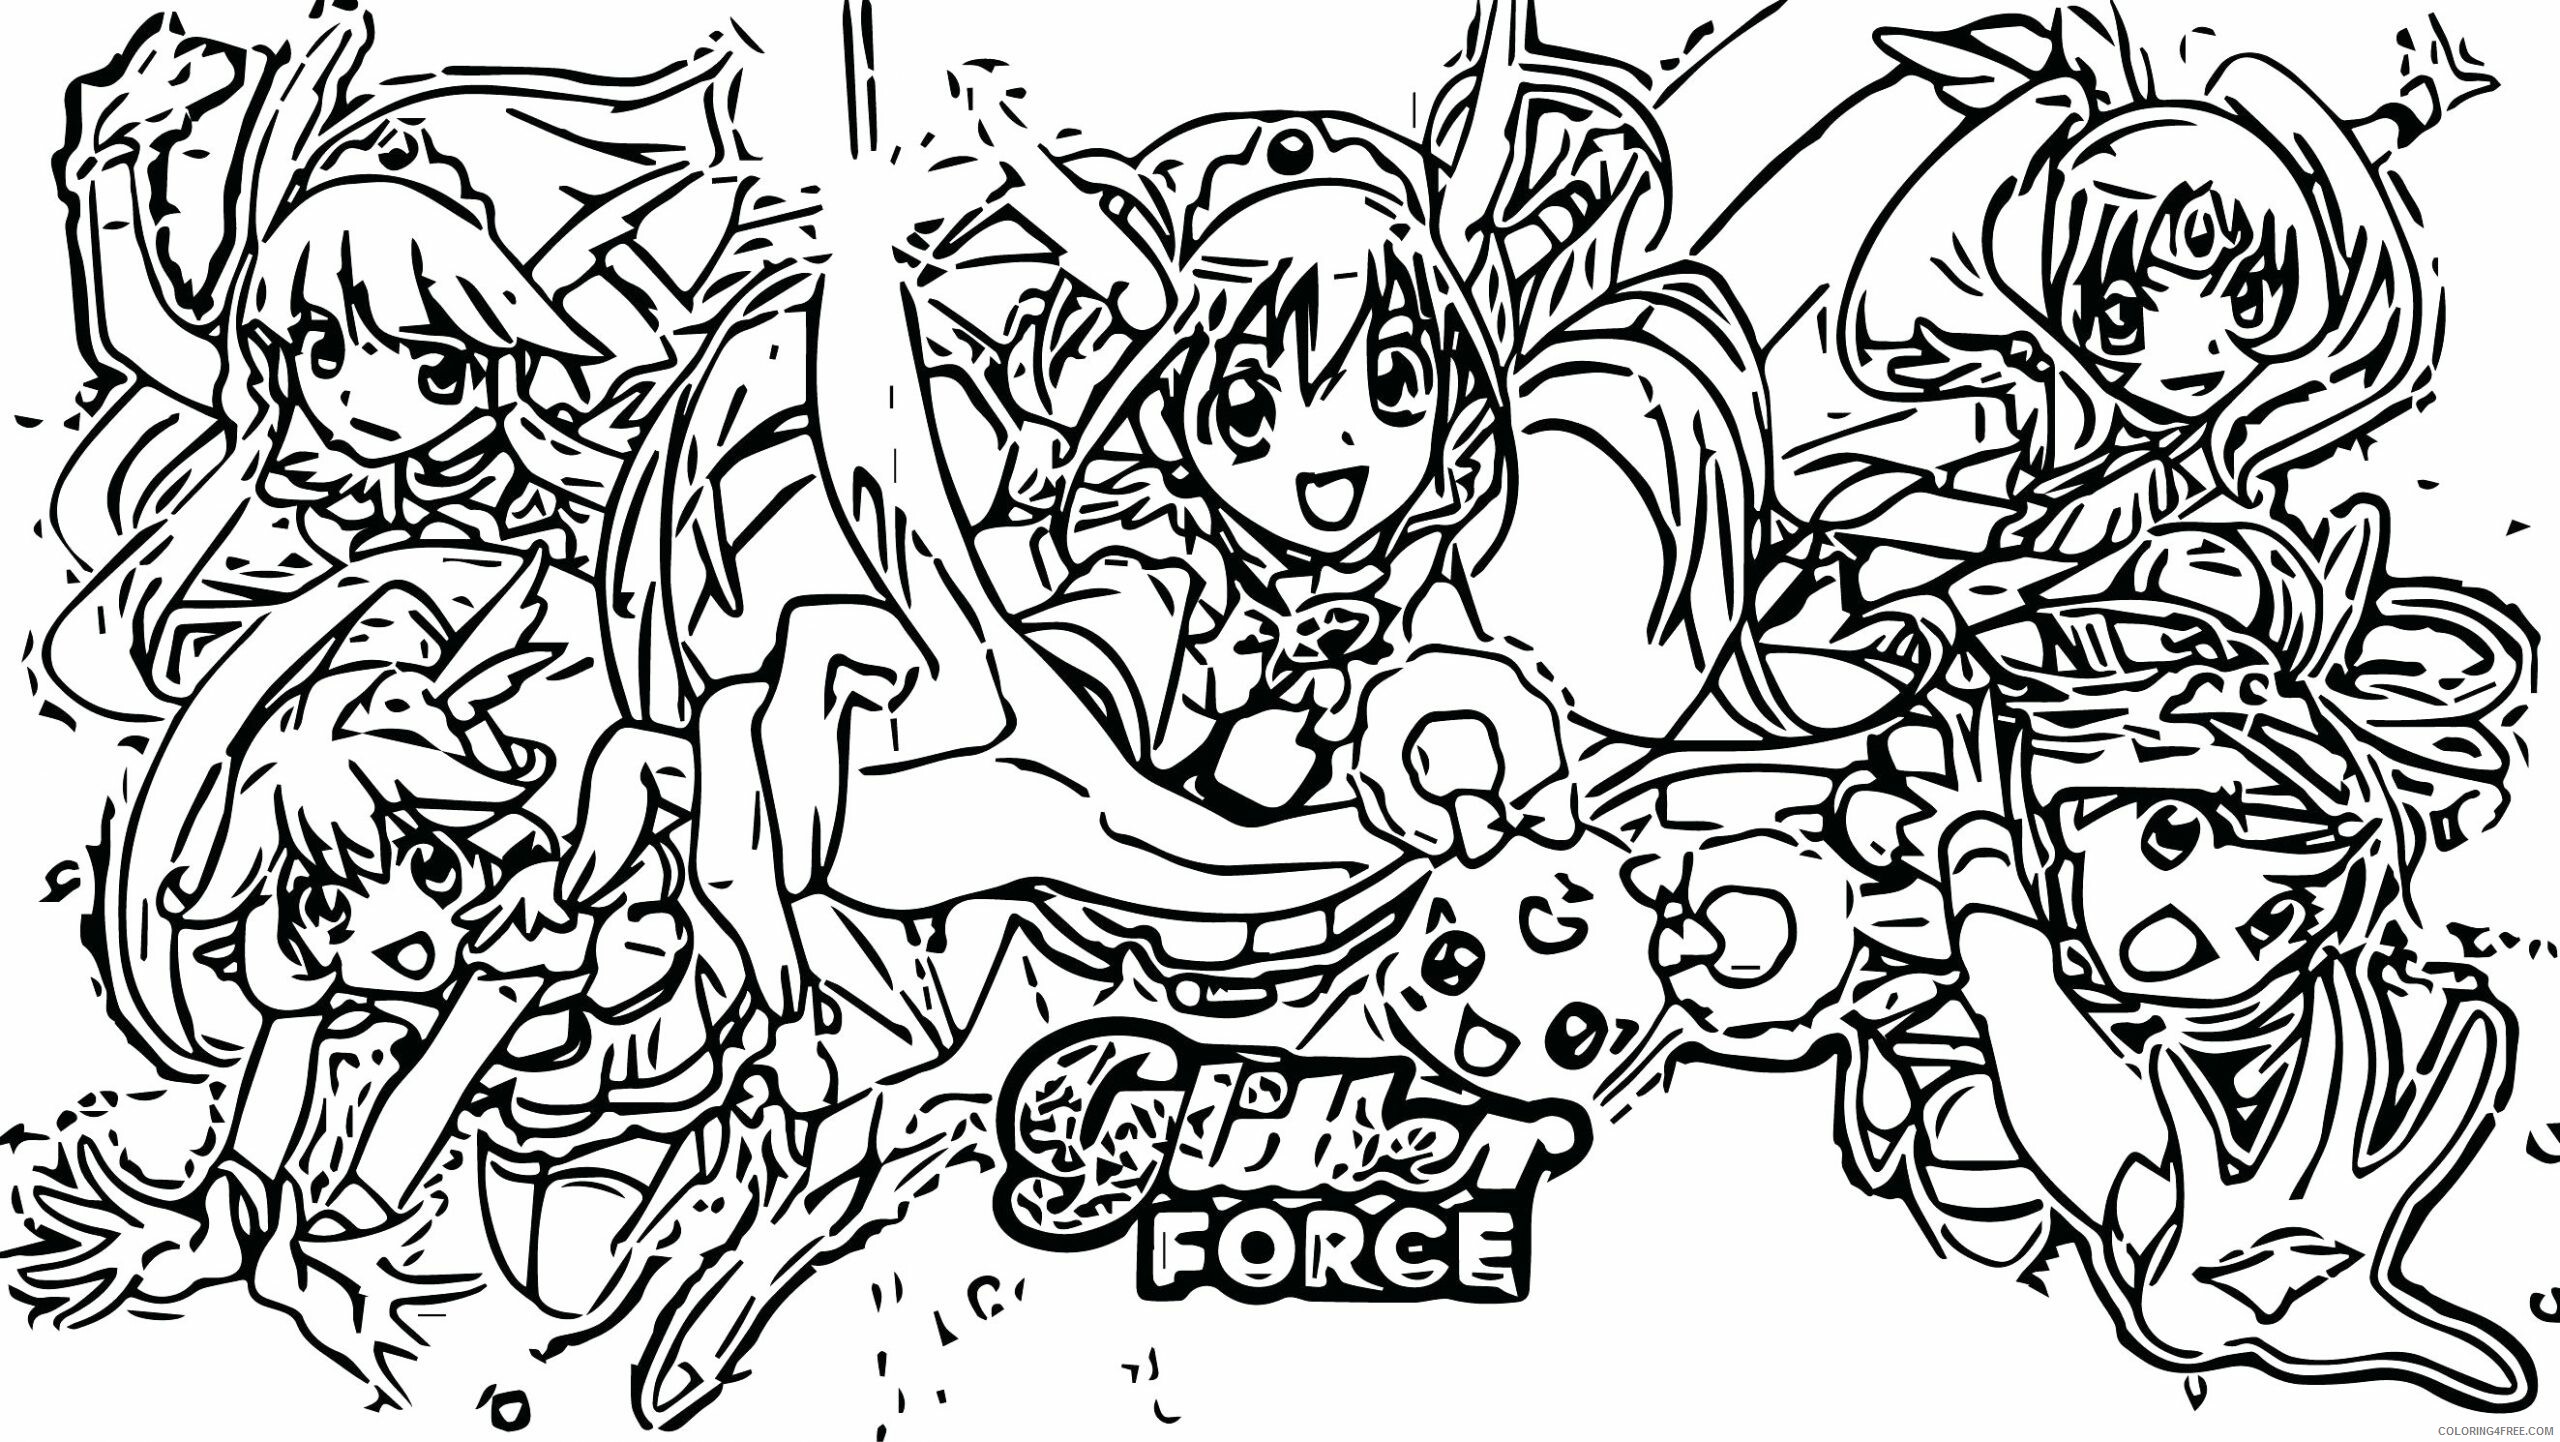 Glitter Force Coloring Pages Anime Glitter Force scaled Printable 2021 062 Coloring4free